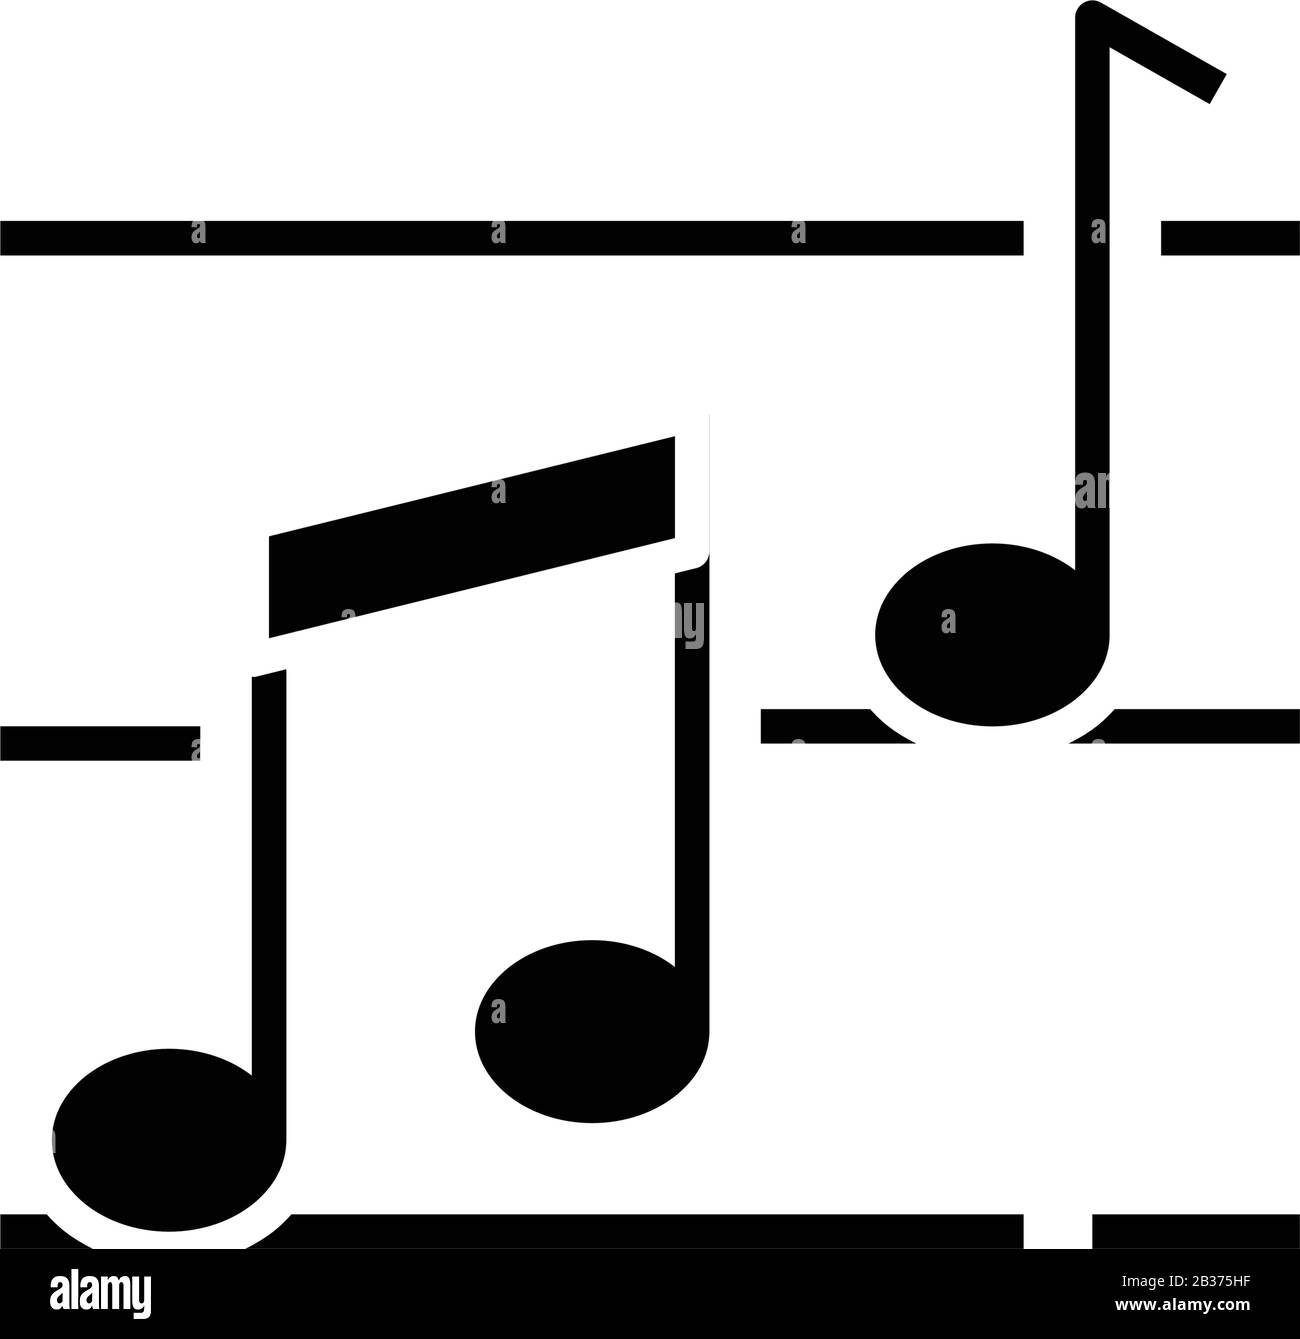 Music notes Black and White Stock Photos & Images - Alamy